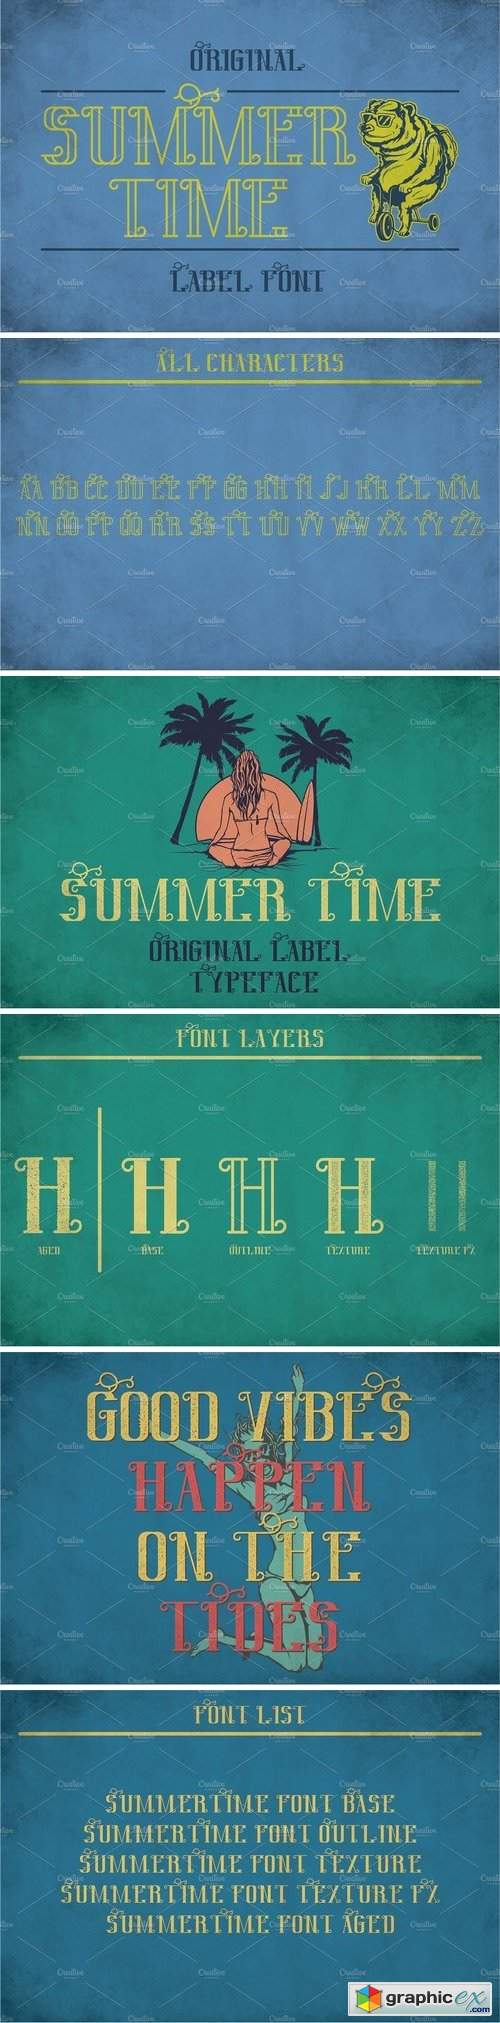 Sumer Time Modern Label Typeface